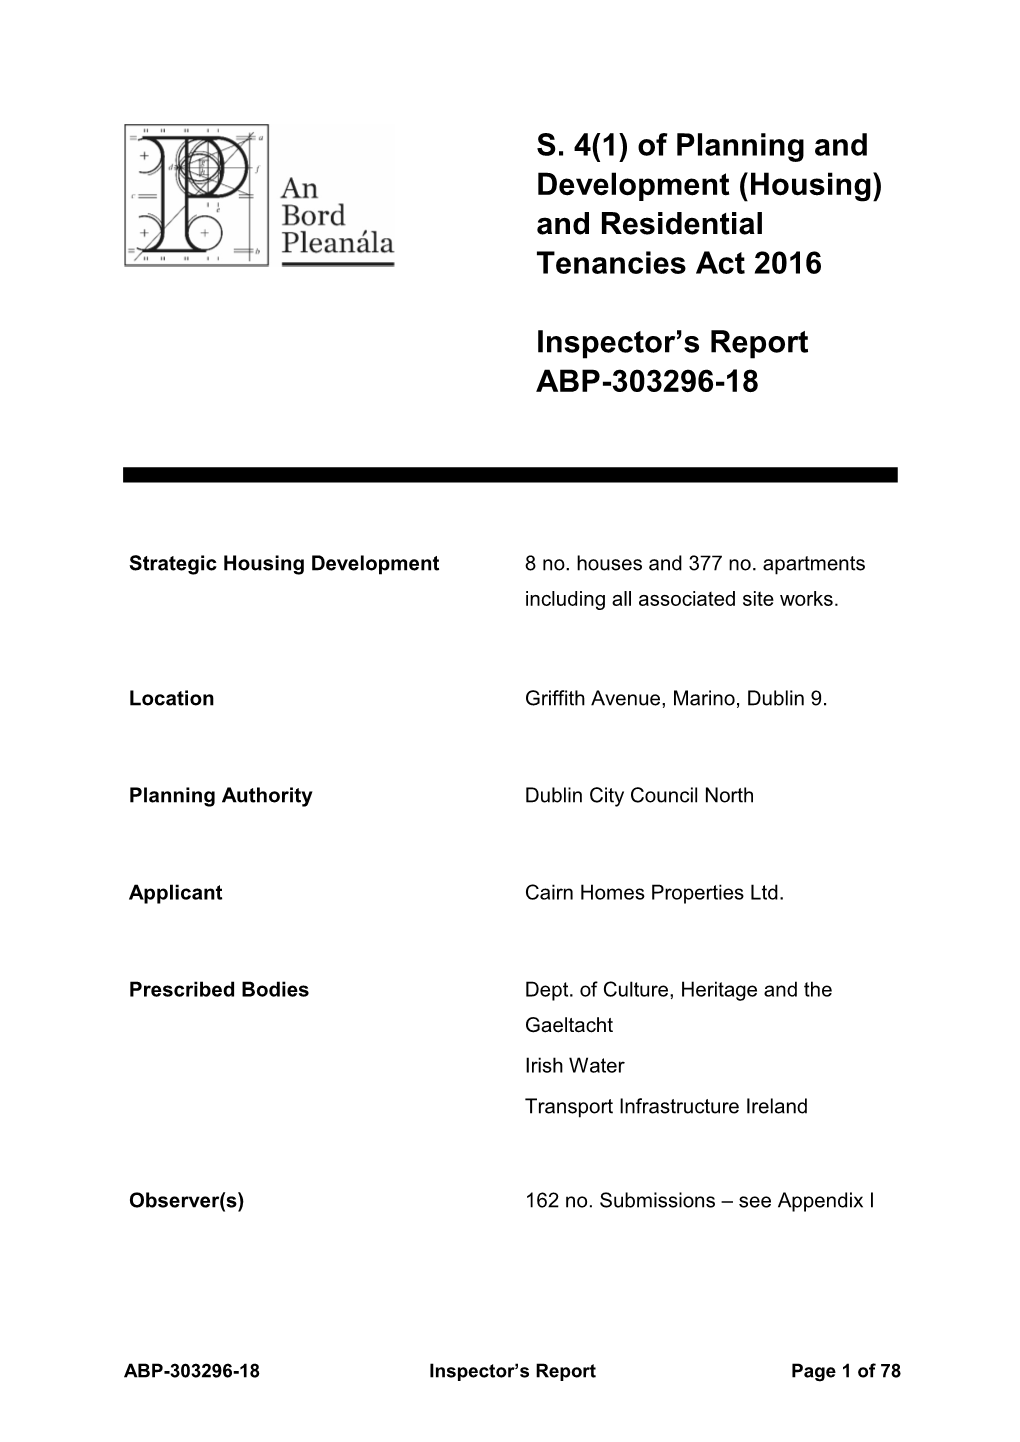 Housing) and Residential Tenancies Act 2016